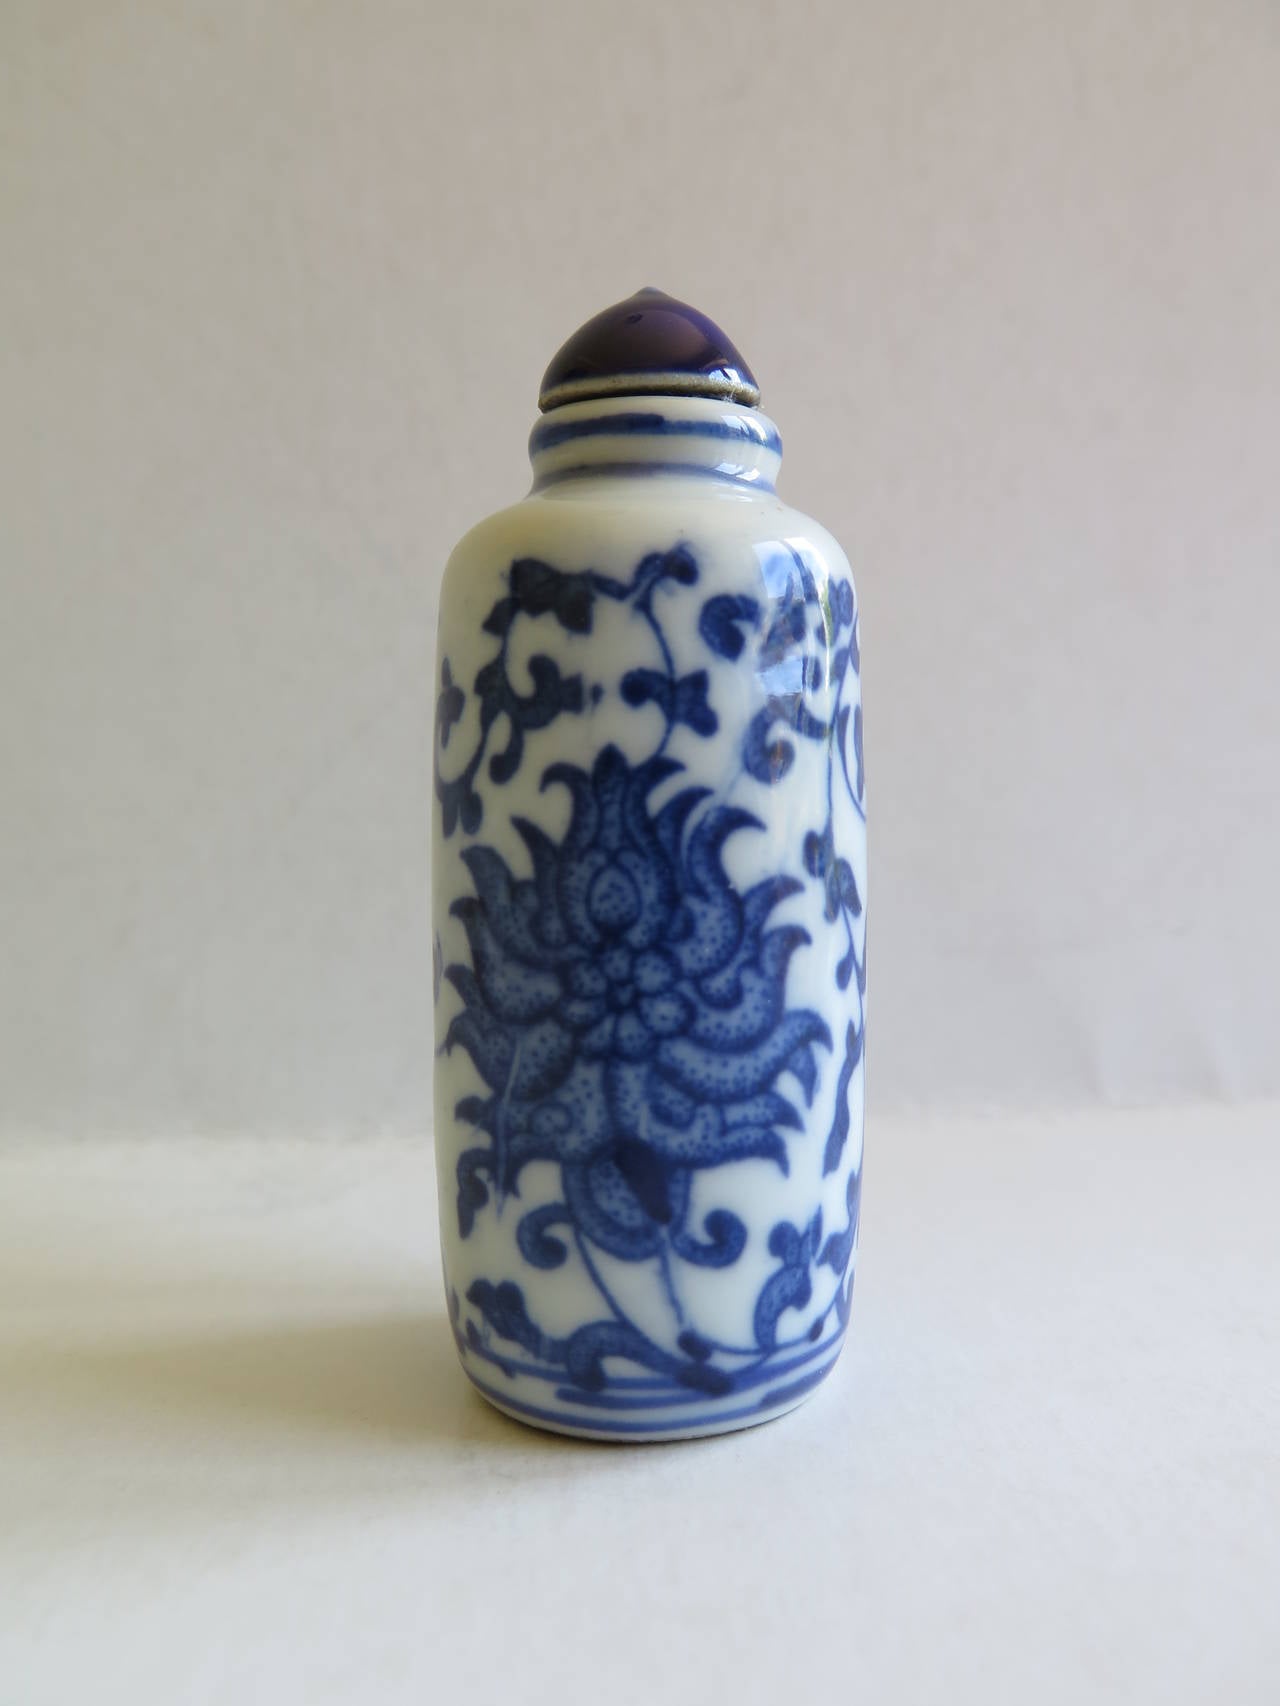 This is a good quality Chinese Snuff Bottle, made from porcelain, circa 1930.

The cylindrical bottle is decorated in varying shades of under-glaze blue, having a large central peony to either side with trailing lotus scrolls linking to the